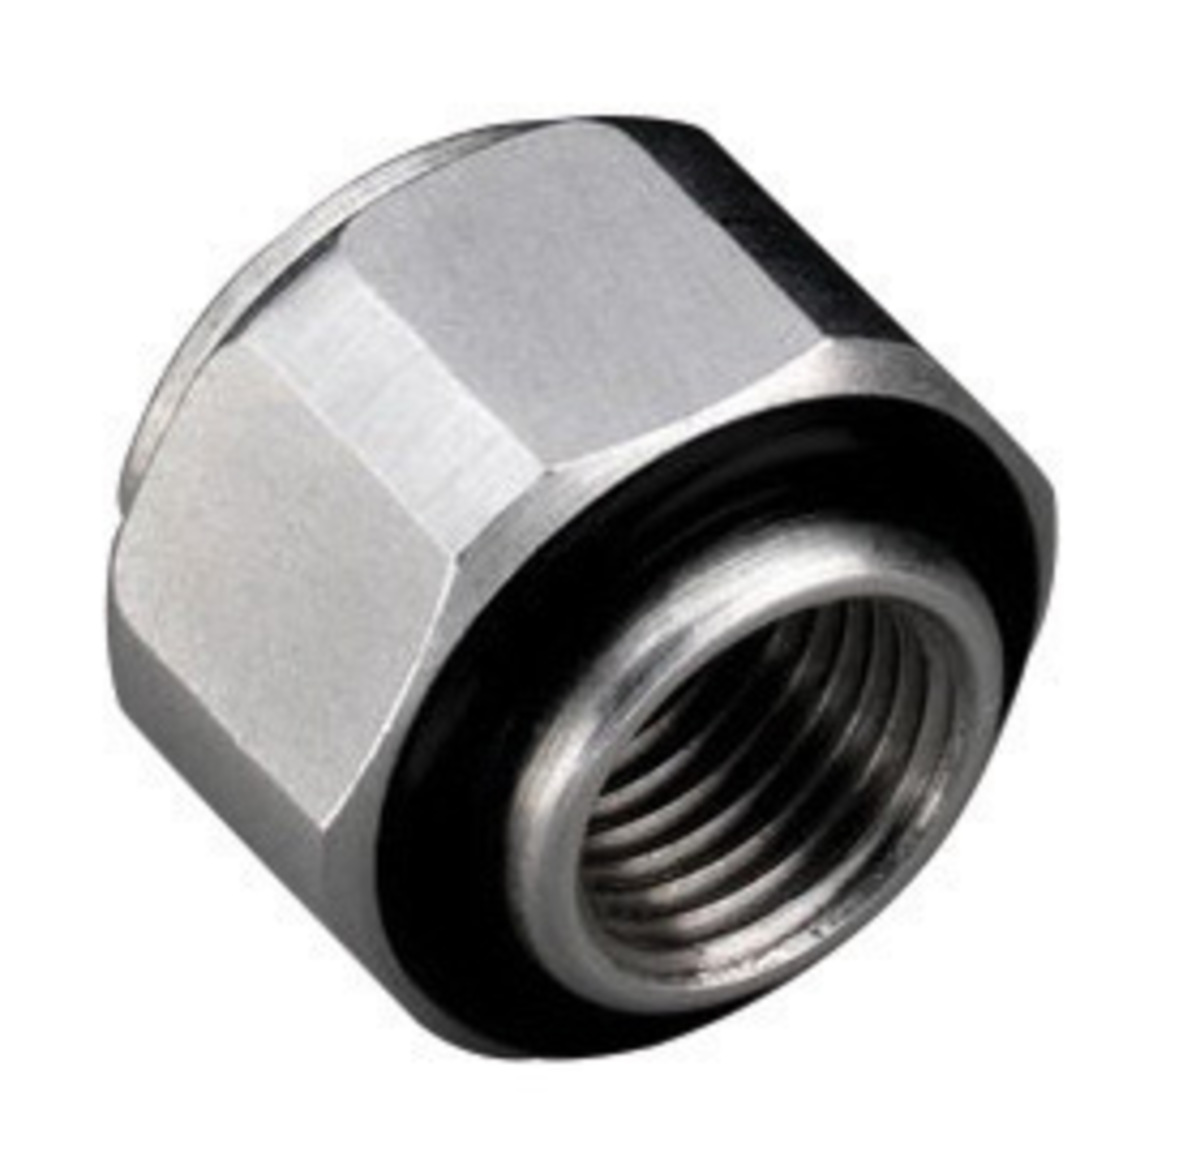 3M™ Metal Nut Base (For Use With W-2806 Panel)